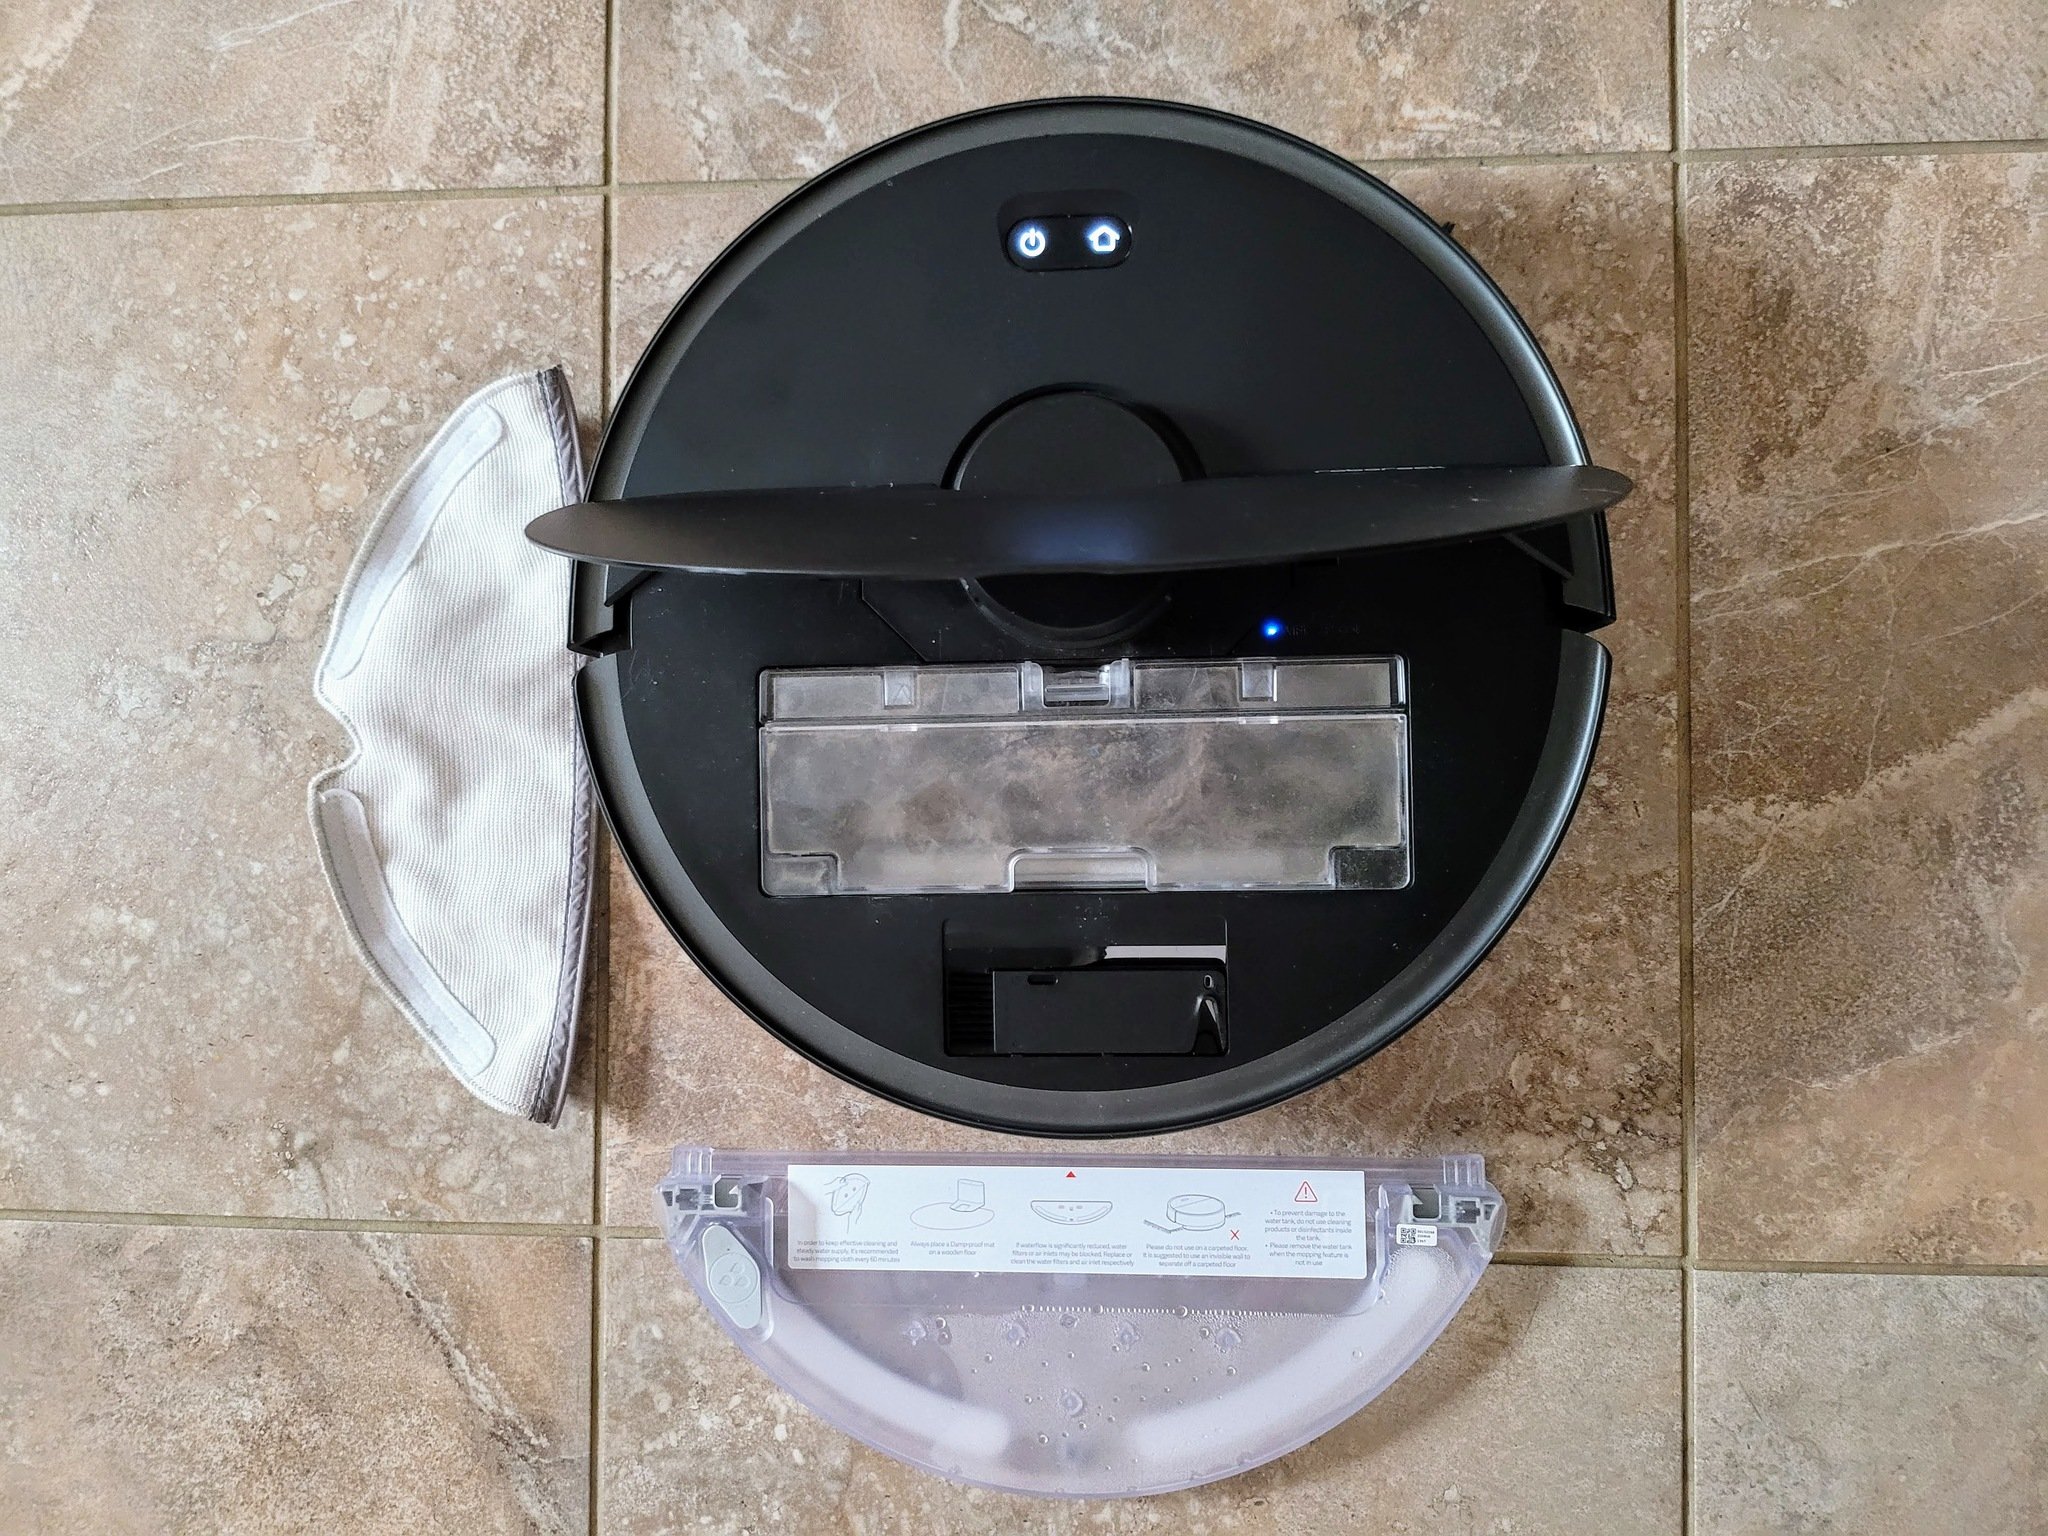 Roborock S6 Pure review: Helping save my rural home from filth